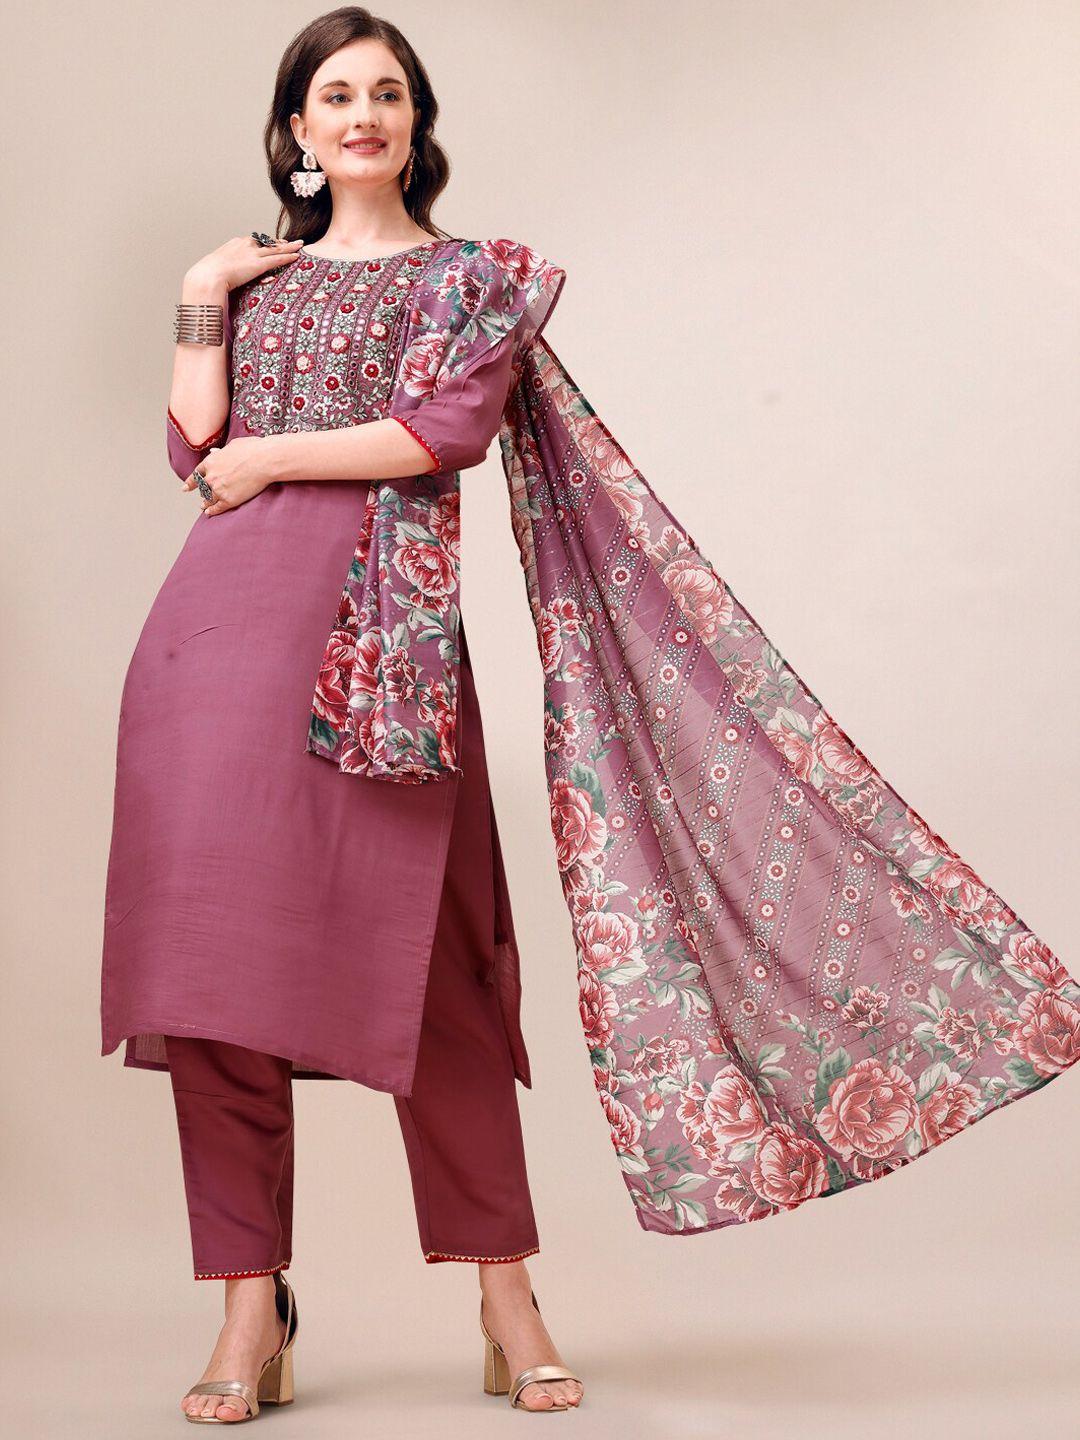 berrylicious-floral-embroidered-thread-work-chanderi-cotton-kurta-with-trousers-&-dupatta